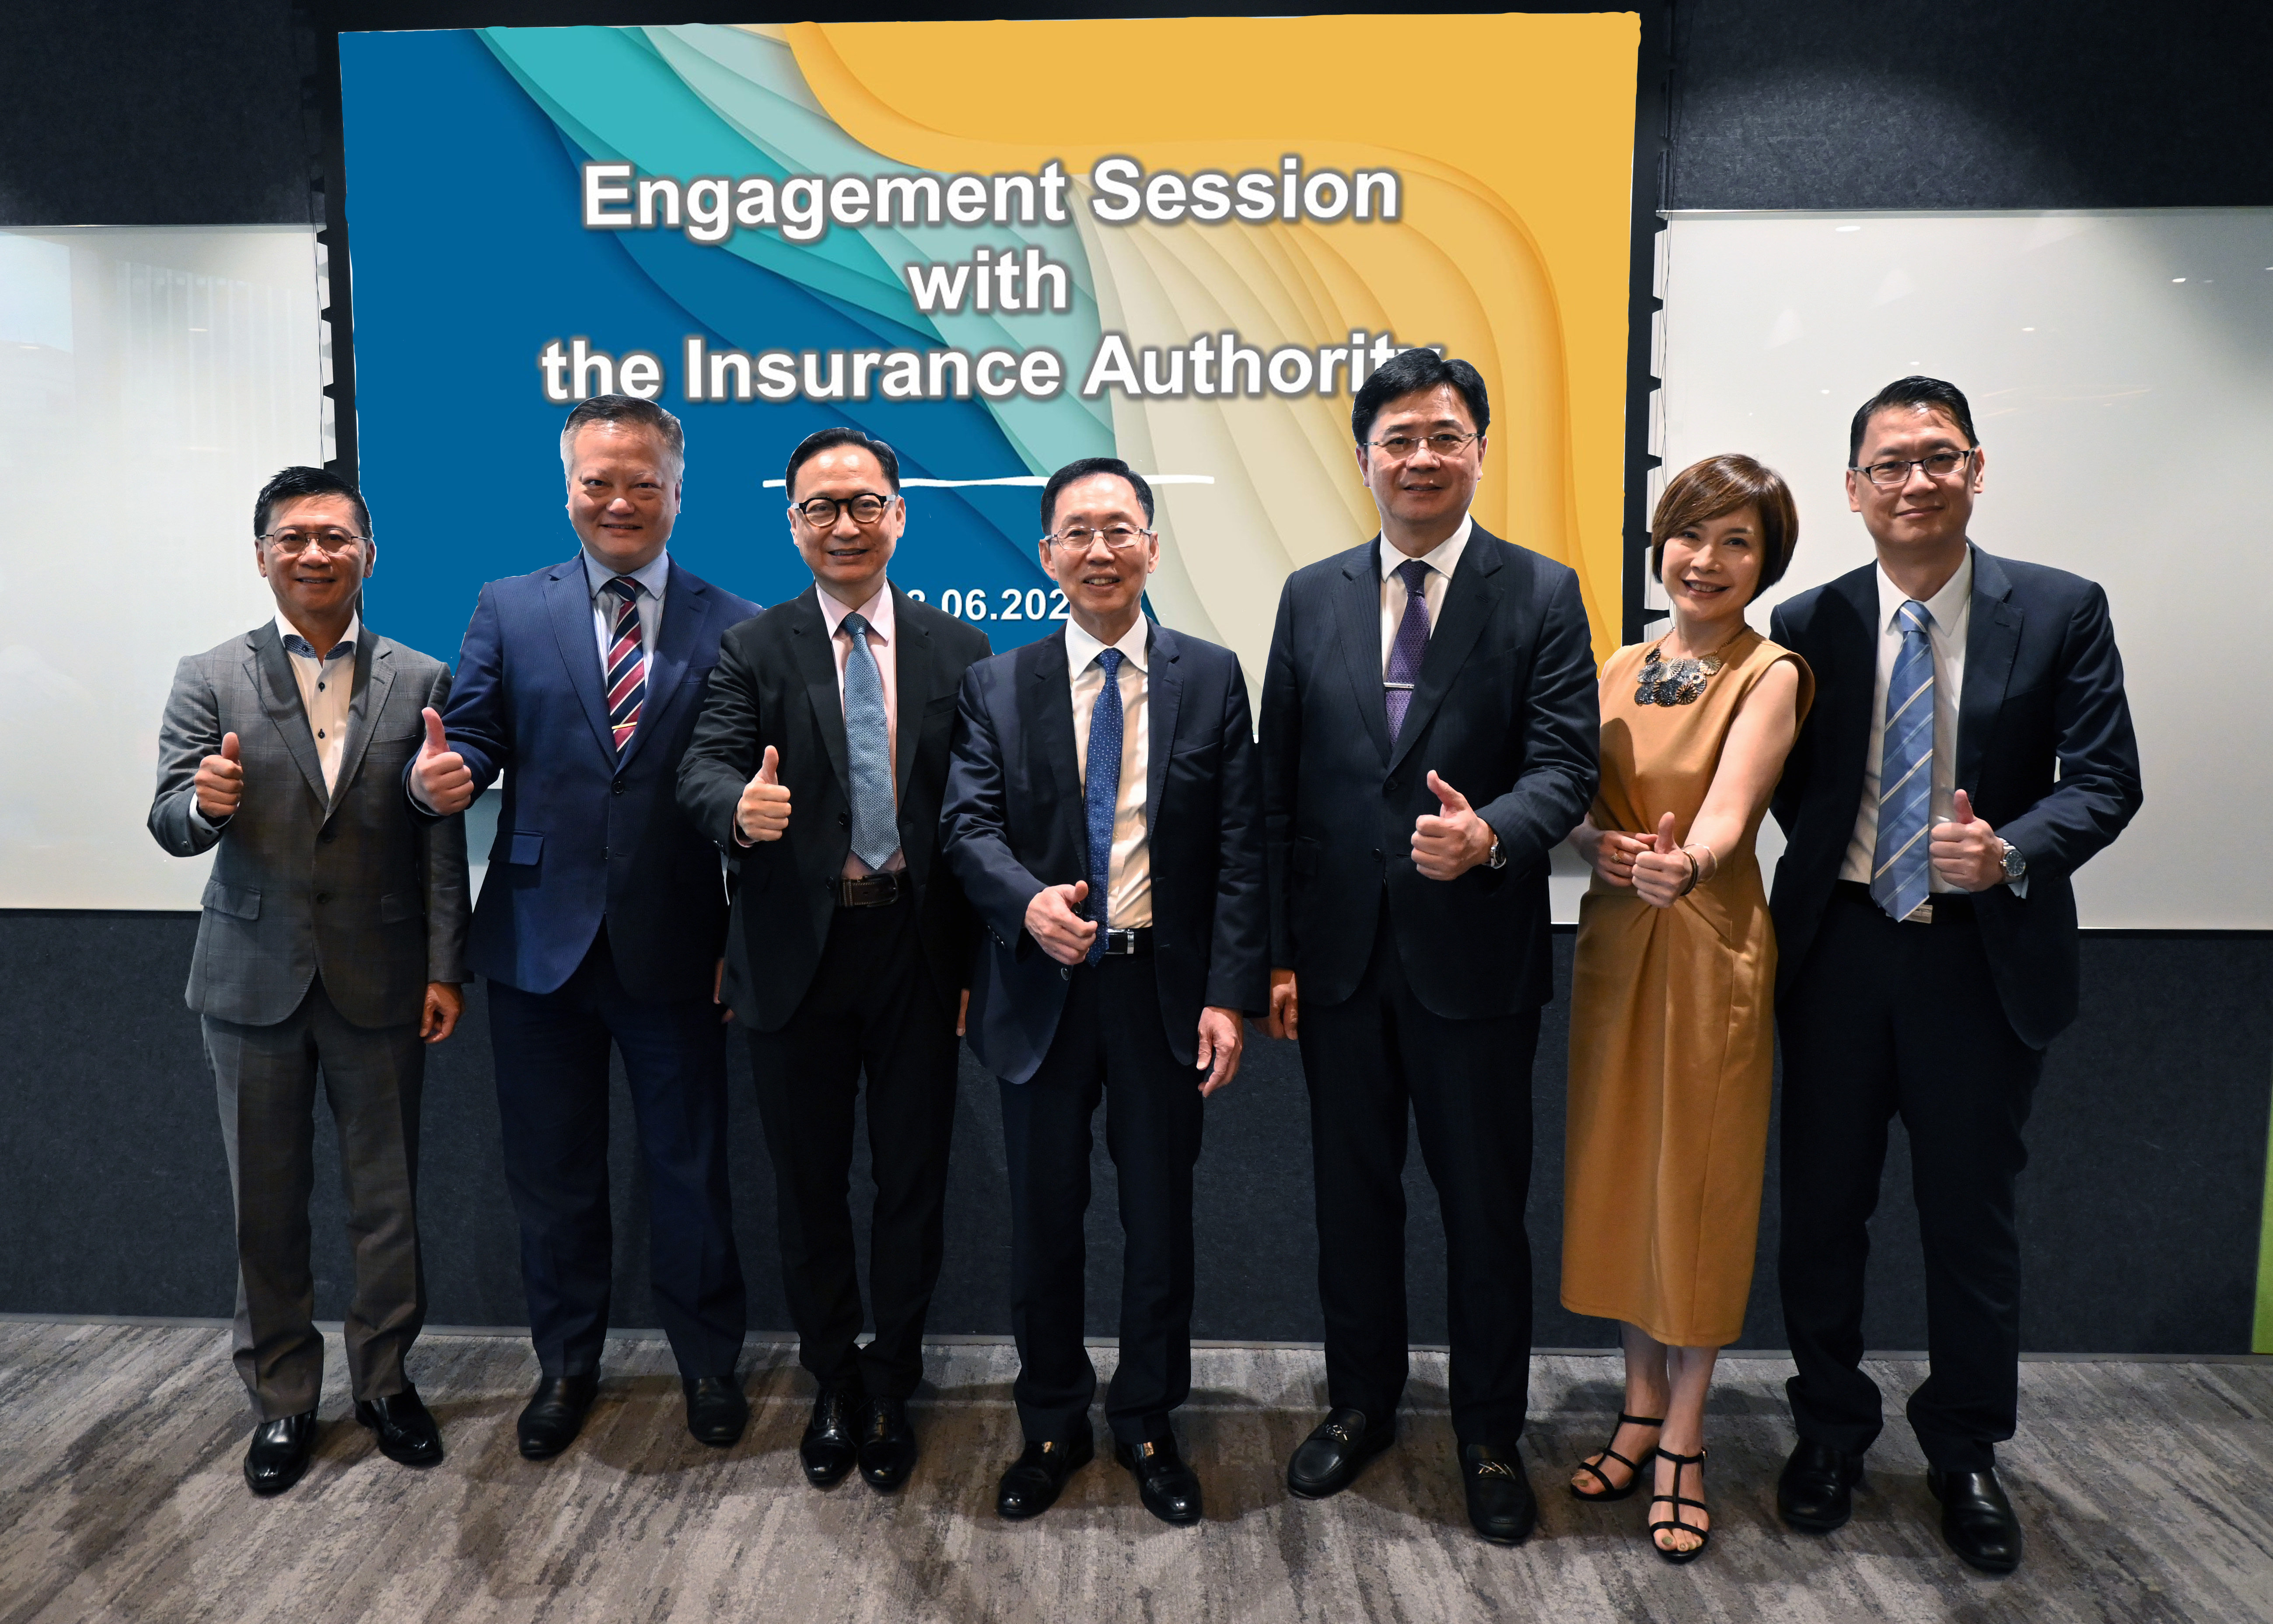 Engagement Session with Insurance Authority on Matters of Industry Concern